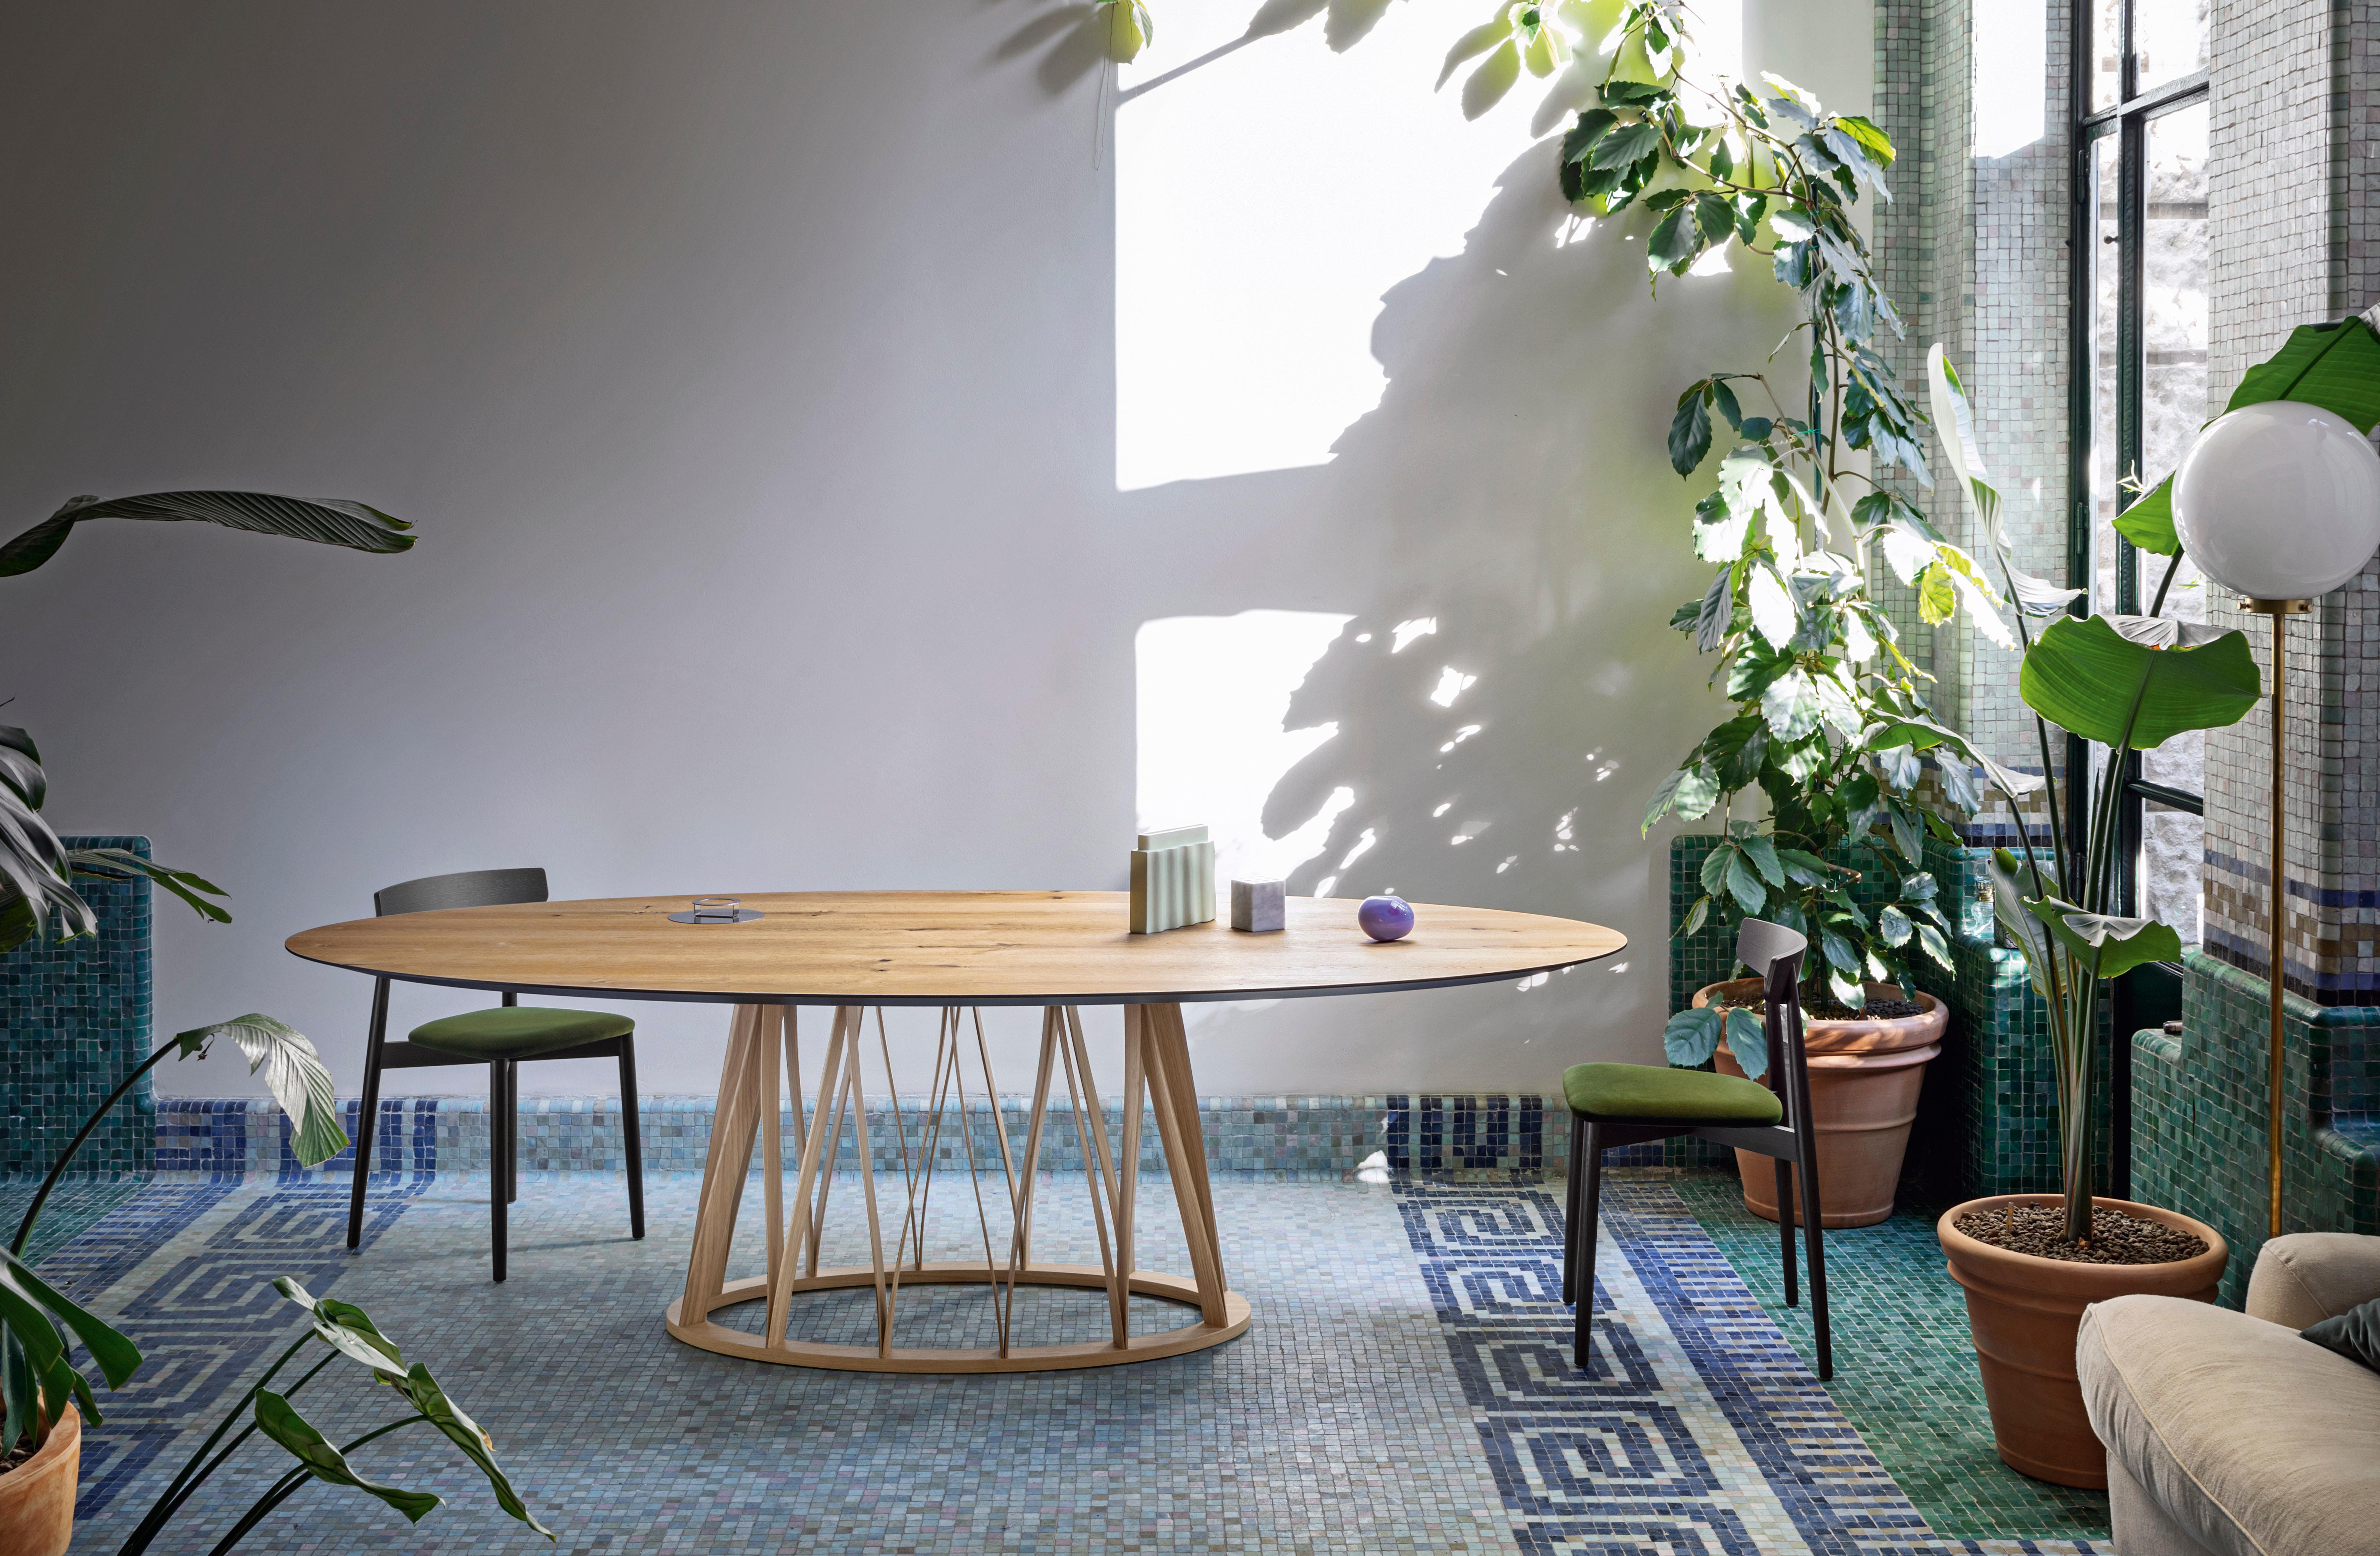 Acco is an elegant dining table with a strong character that resists labelling. It displays a mature, sophisticated language, which is developed through the design of the base frame with its distinct regular pattern of wooden lines.

Additional